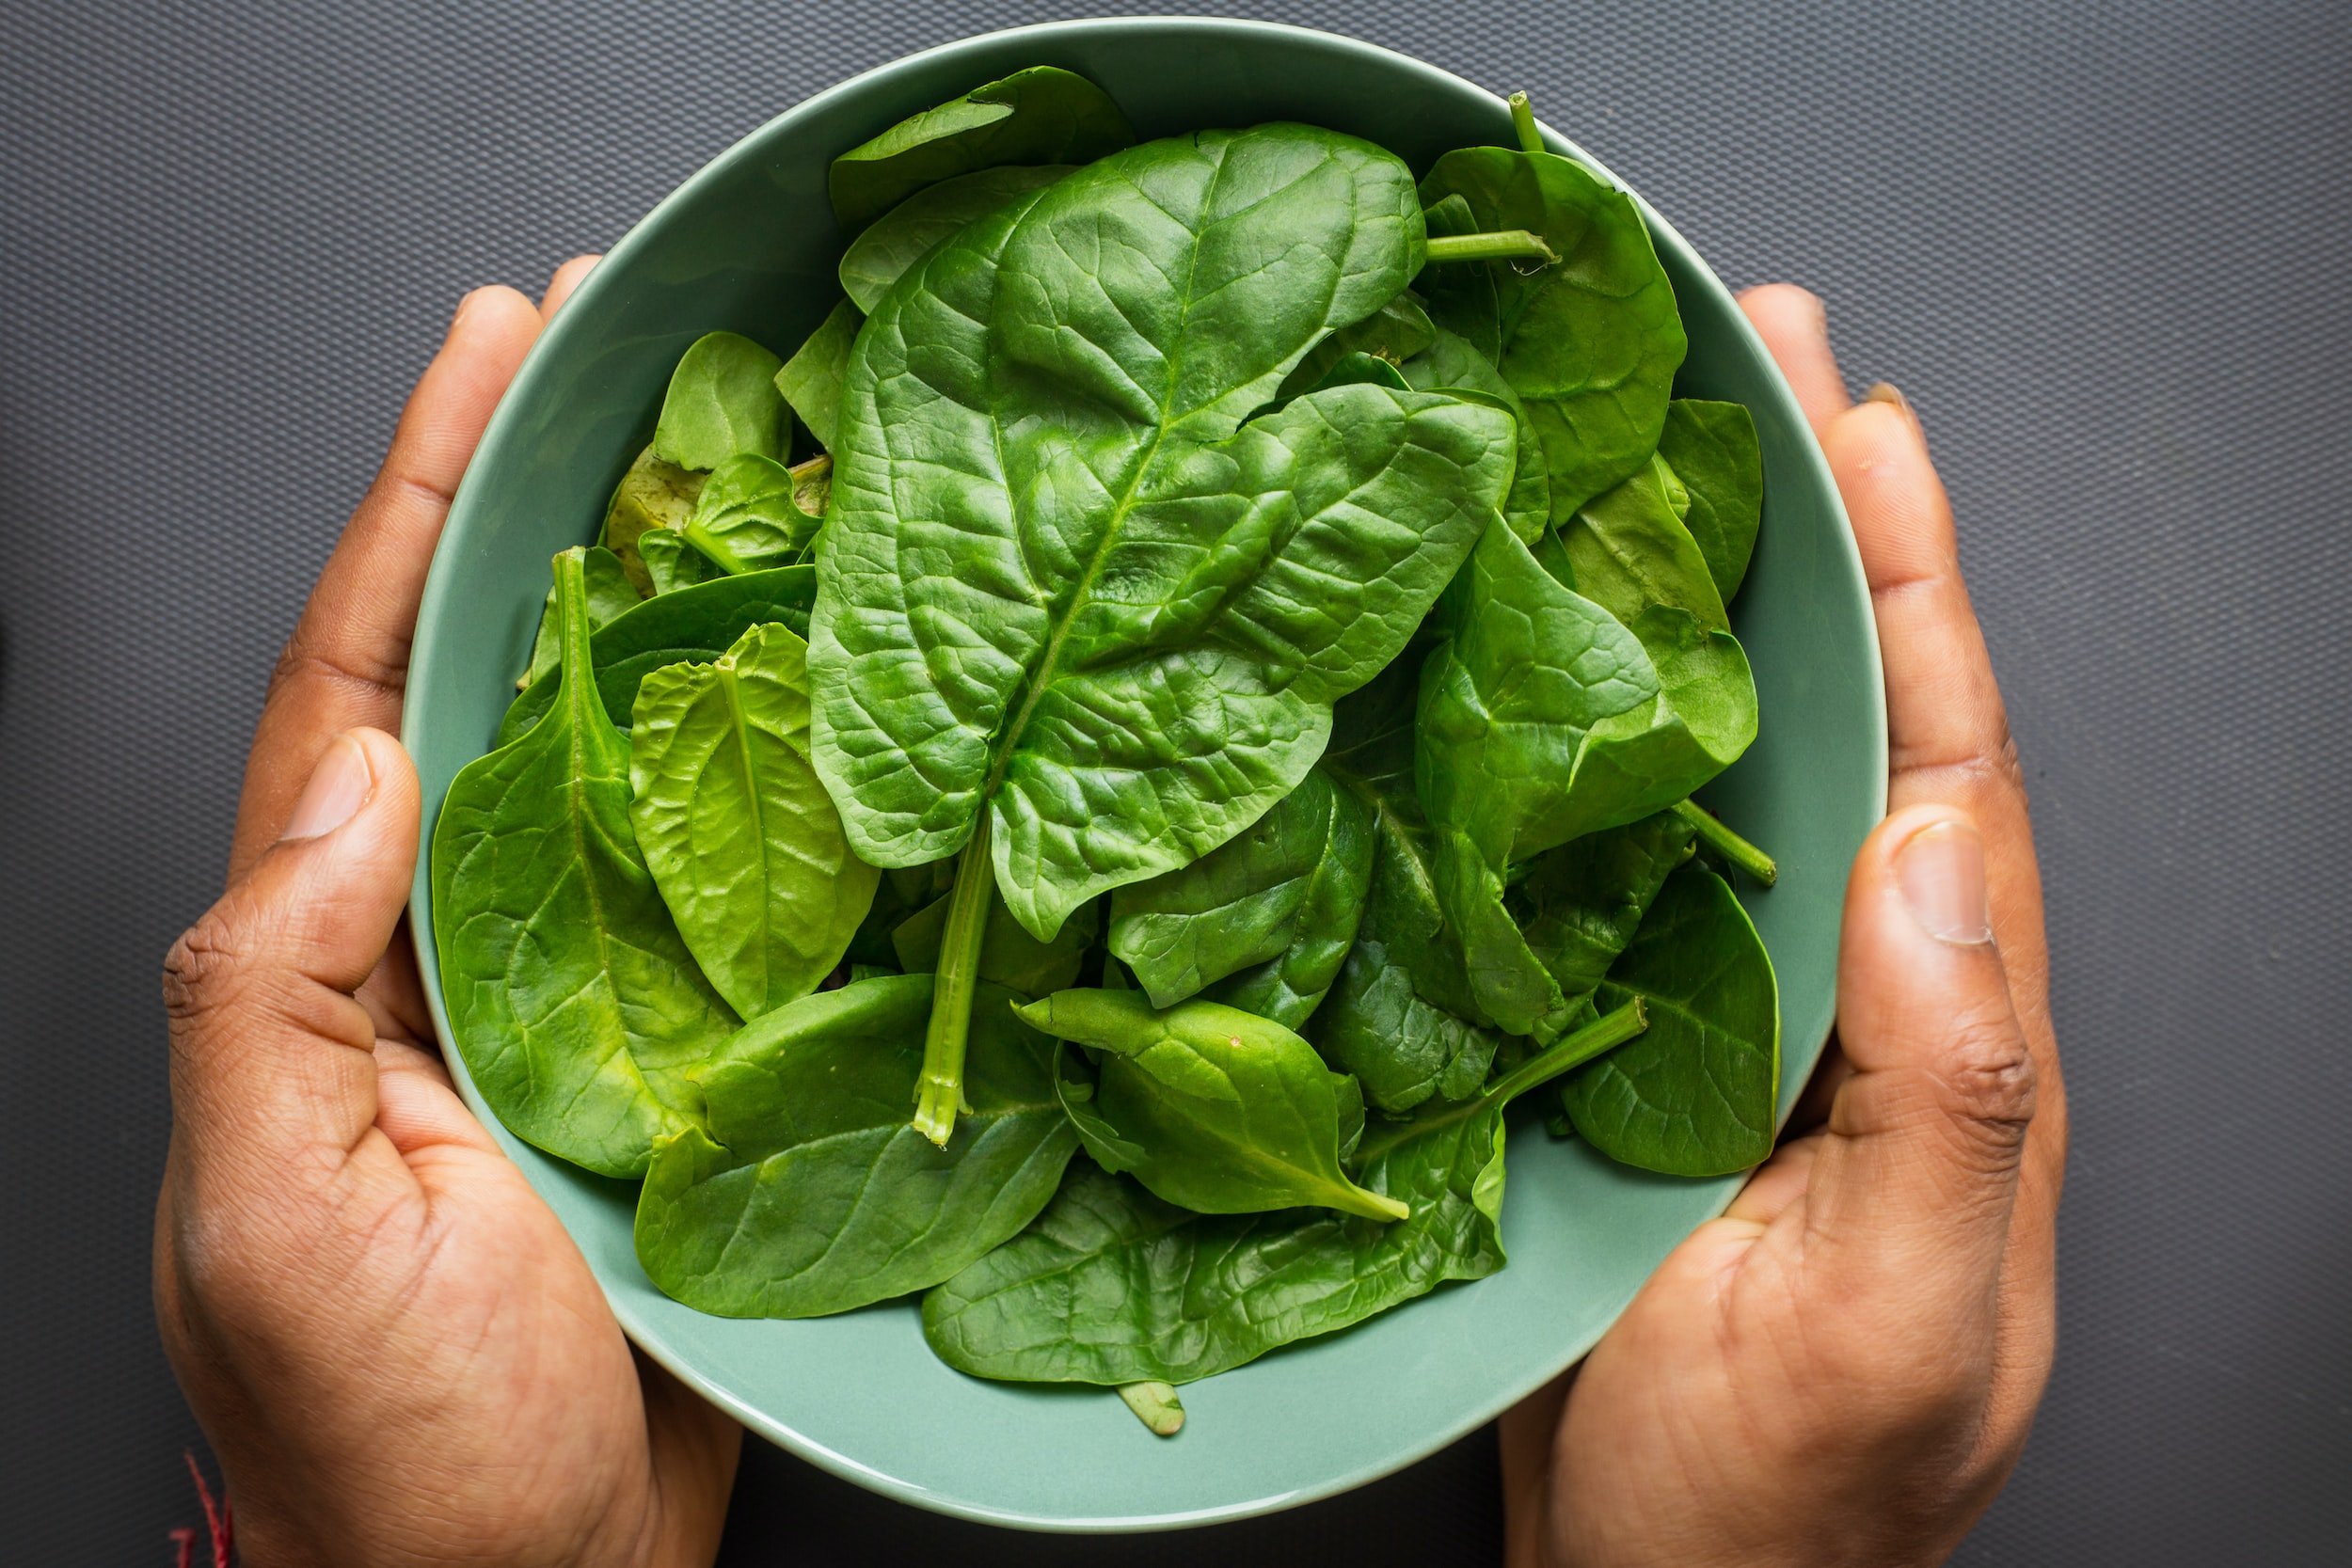 Harvesting and Enjoying Fresh, Nutritious Hydroponic Spinach